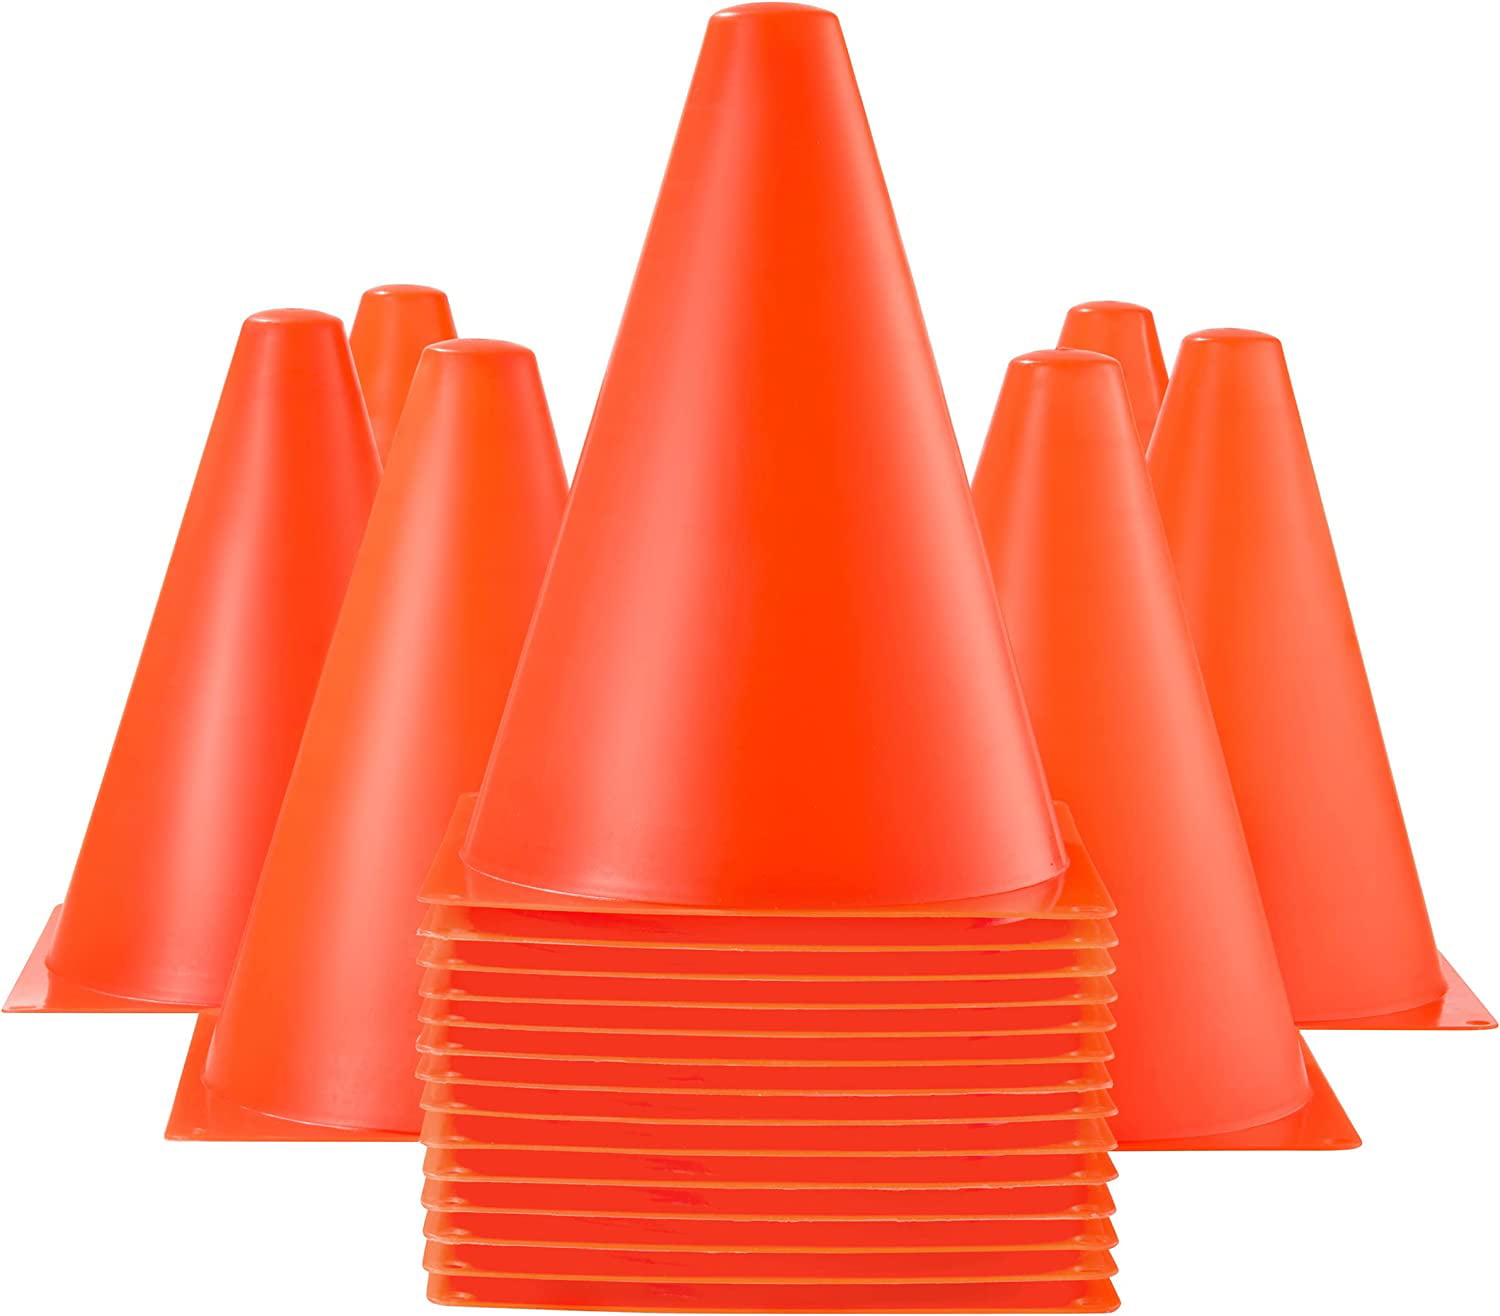 NEW Dazzling Toys Pack 24 7 inch Orange Plastic Traffic Cones FREE SHIPPING 